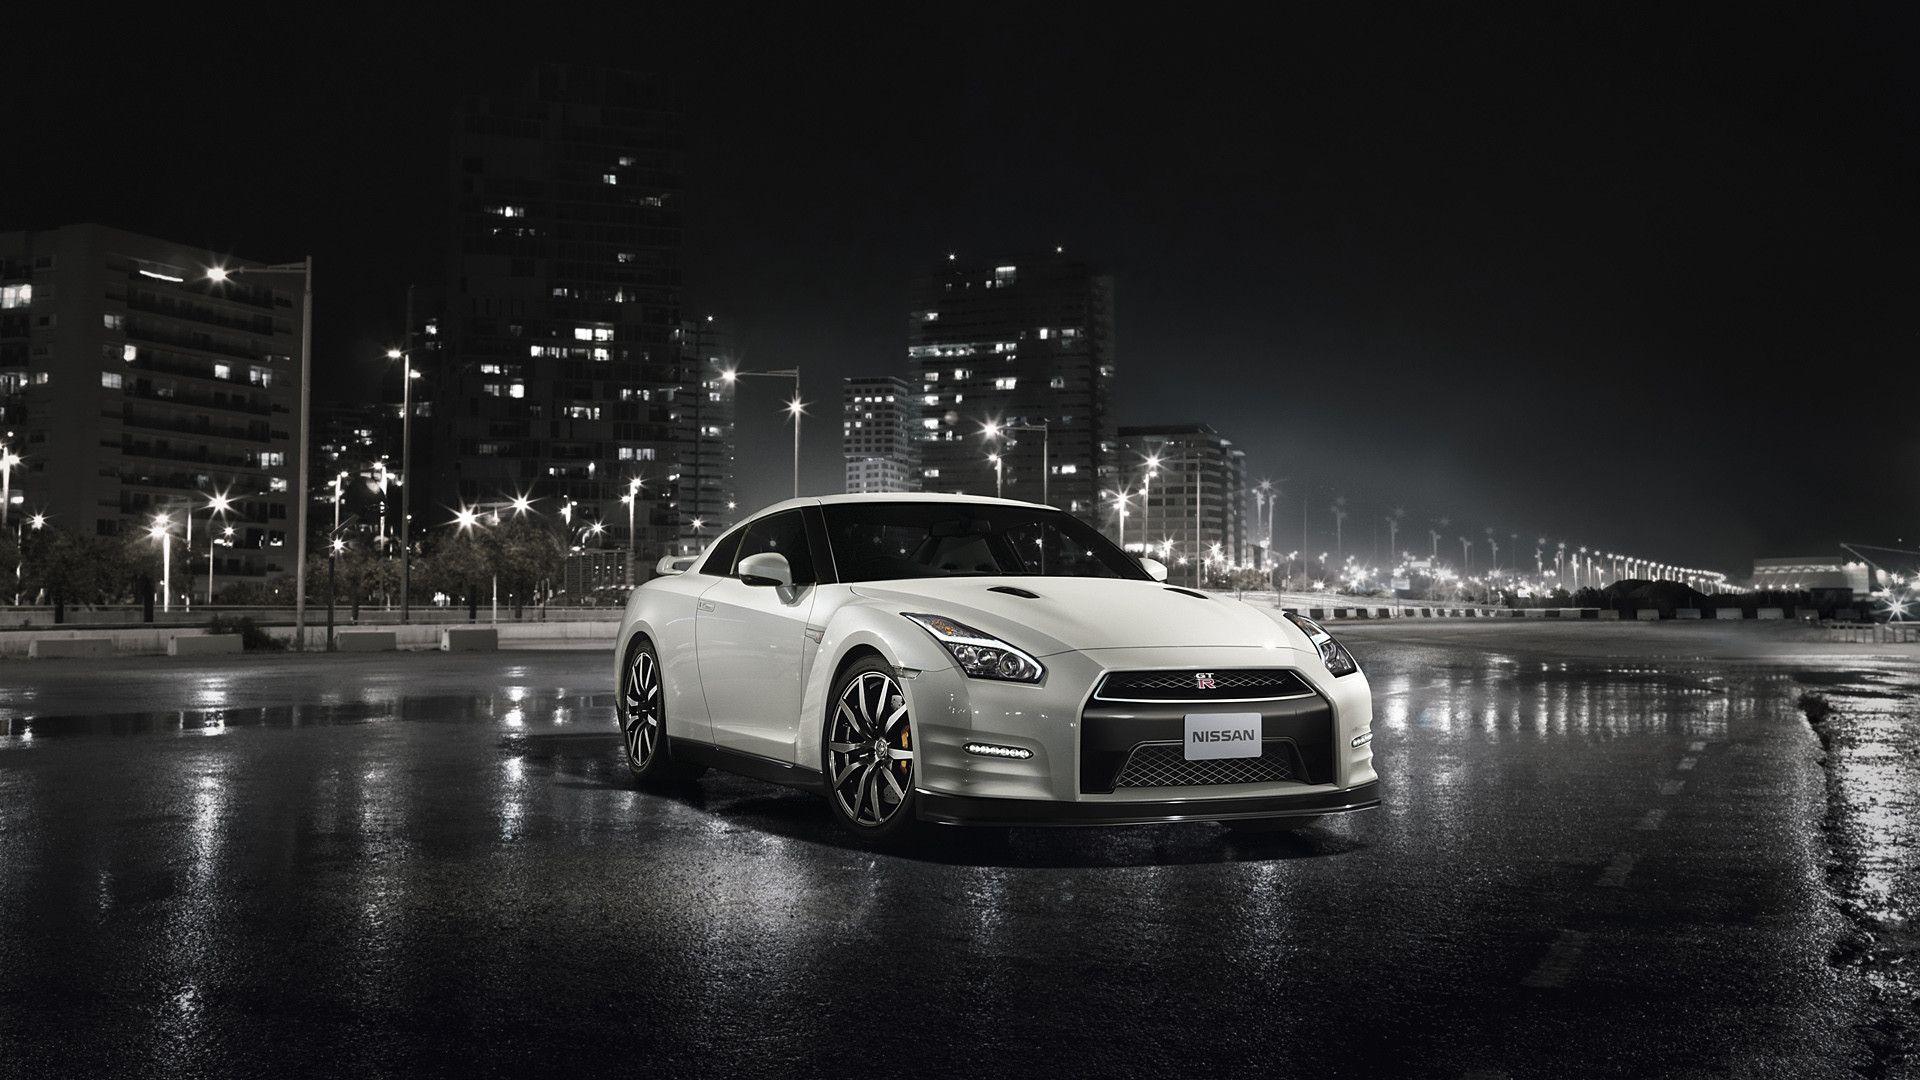 Black And White Gtr Wallpapers Top Free Black And White Gtr Backgrounds Wallpaperaccess